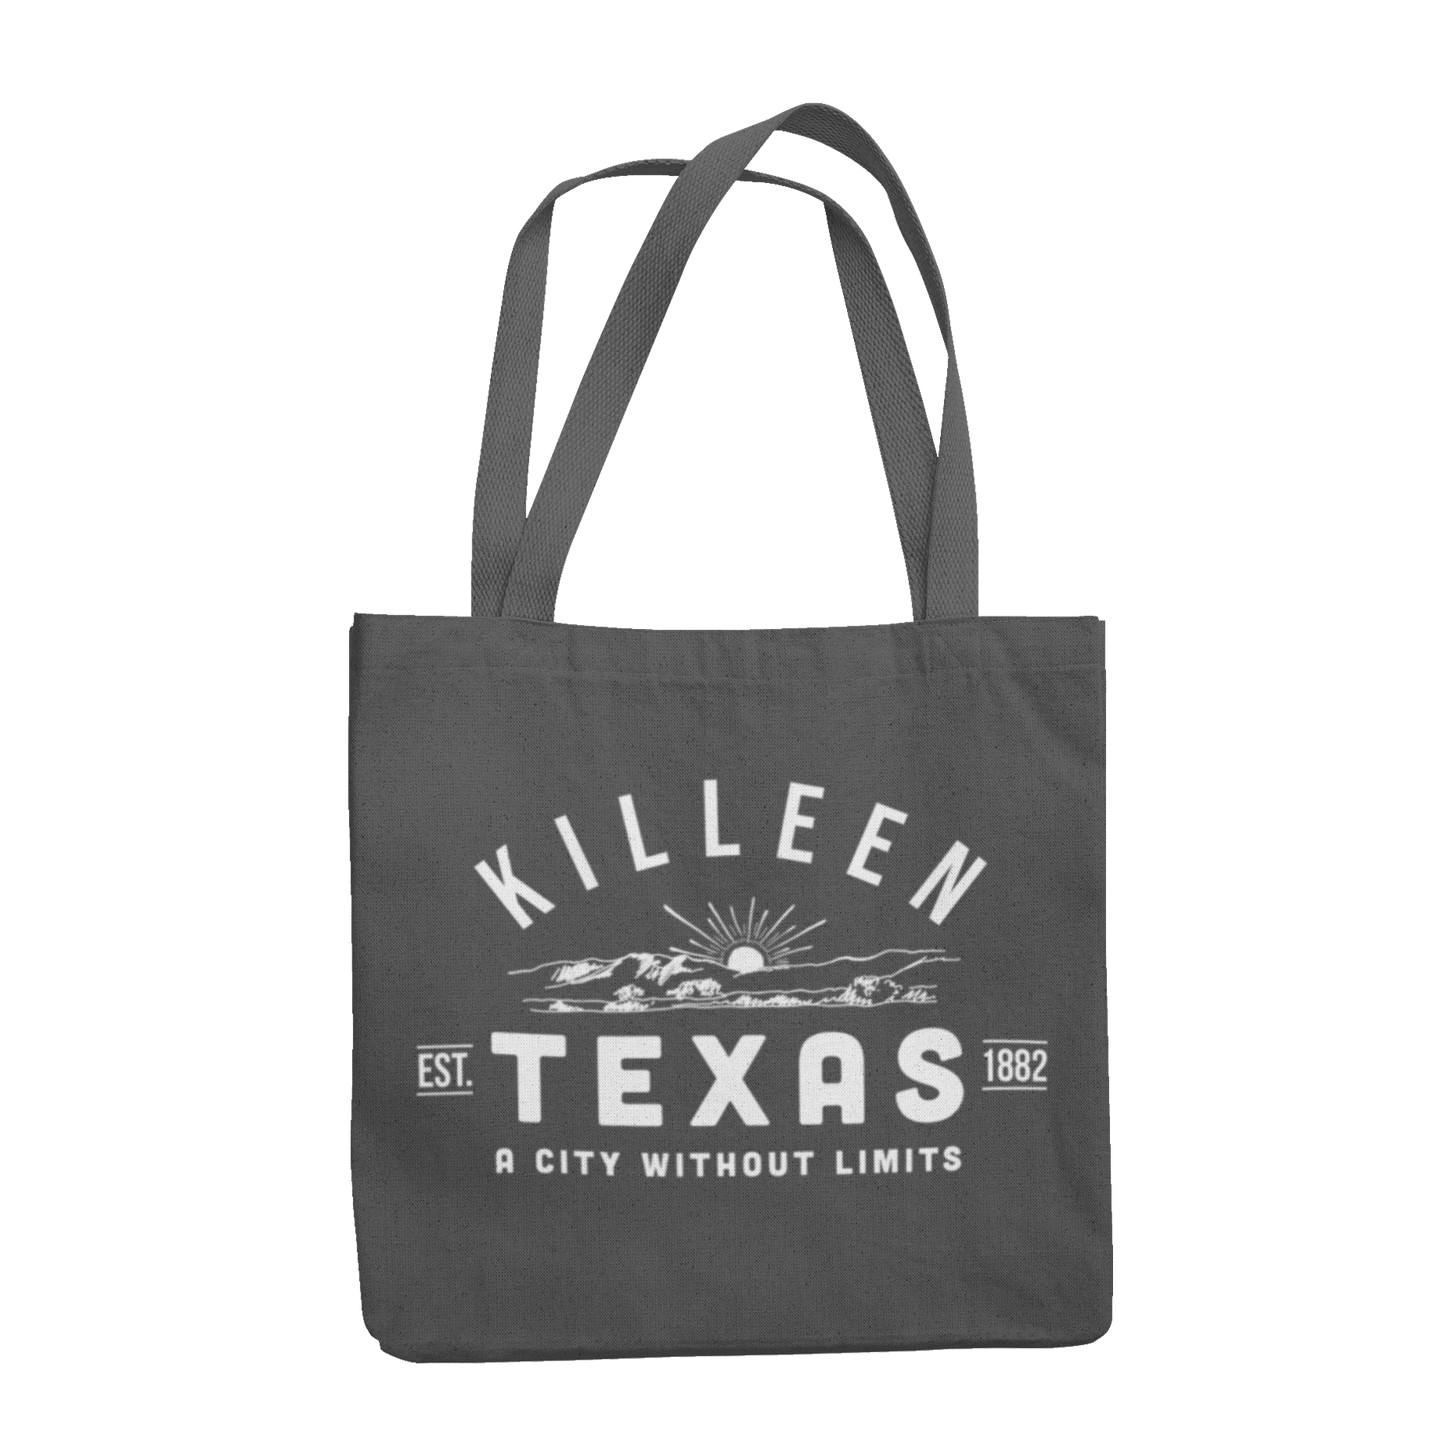 Killeen Texas Tote Bag-Without Limits